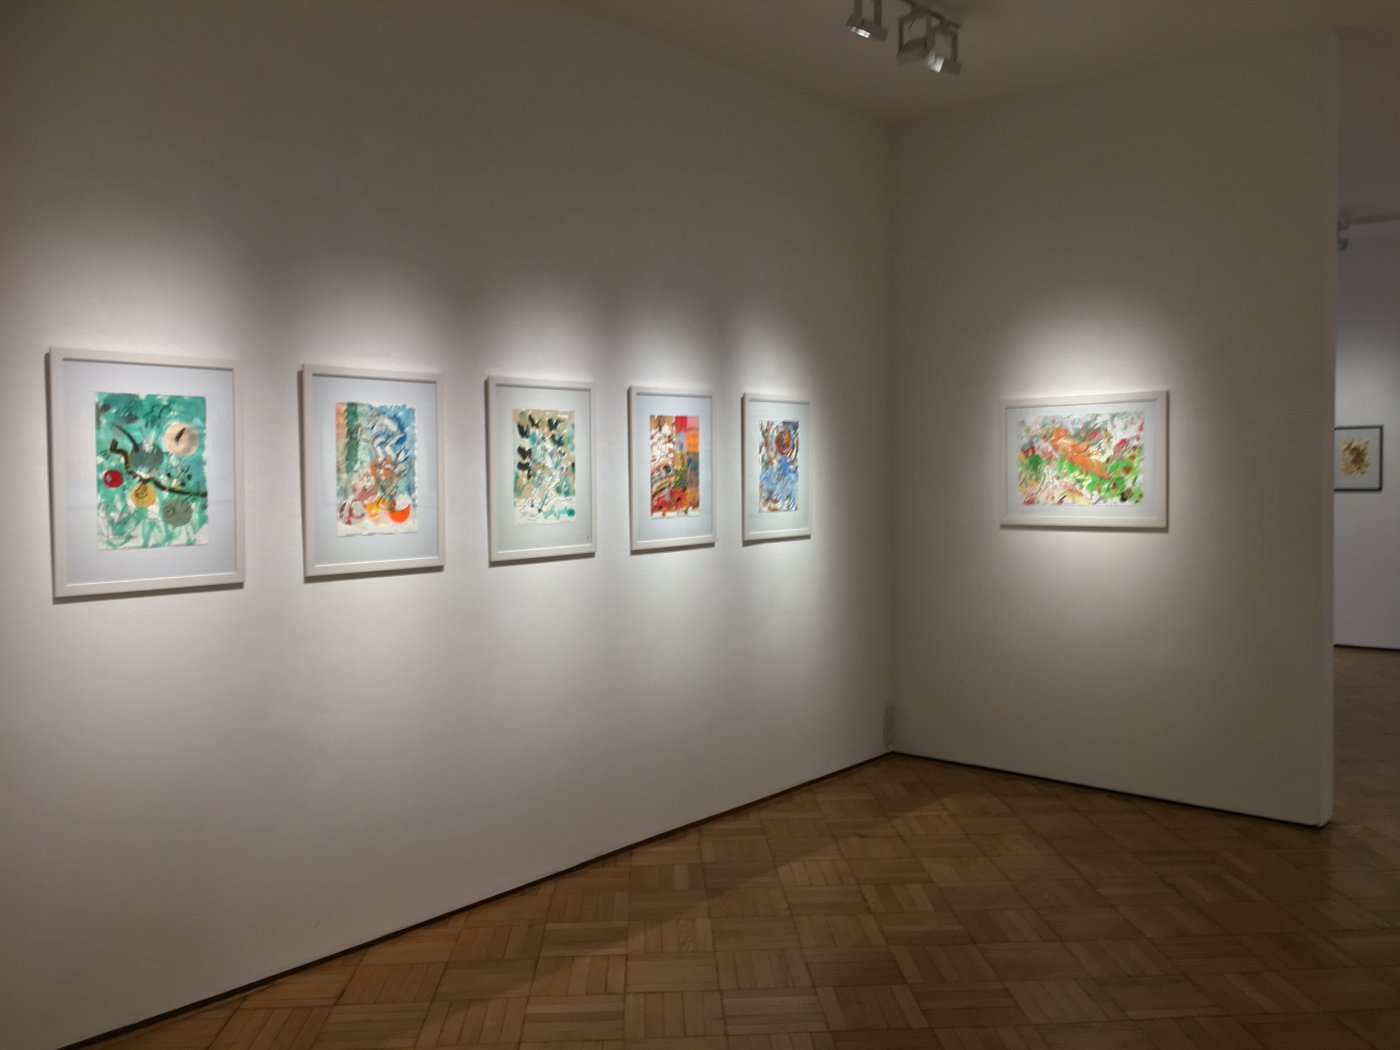 Installation image for Christian Ludwig Attersee: Haus im Dschungel, at Galerie Ernst Hilger